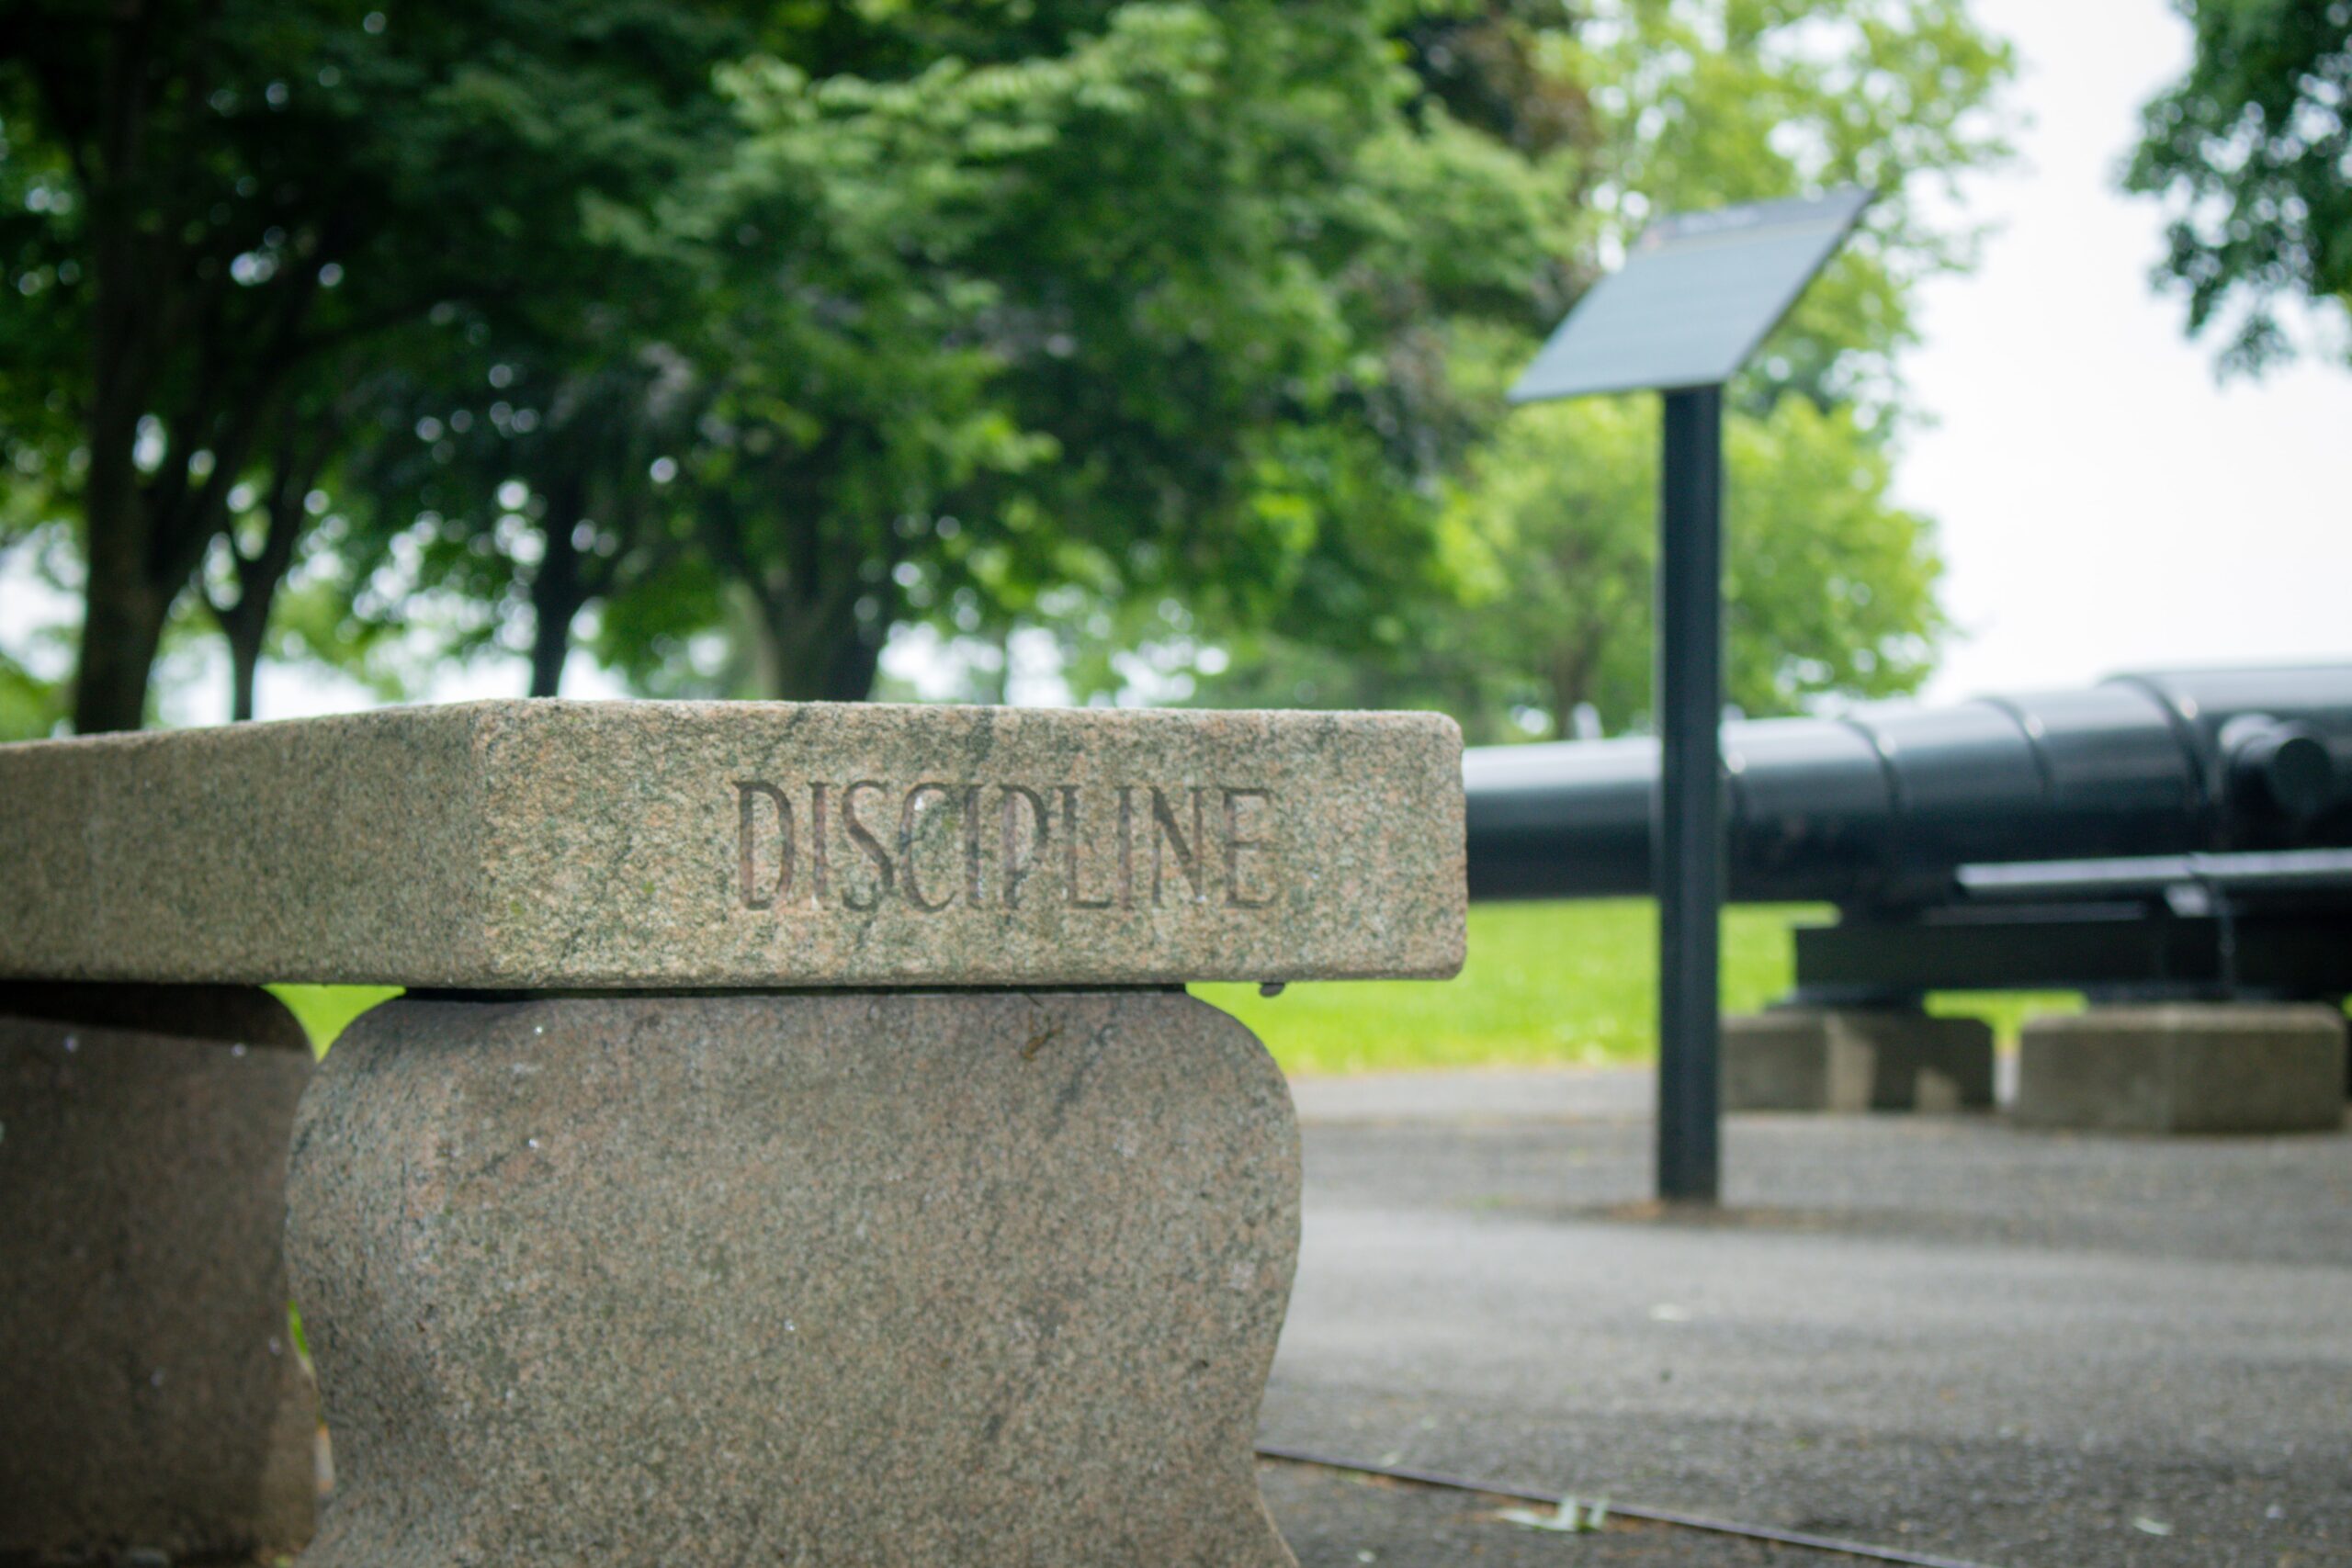 The role of discipline